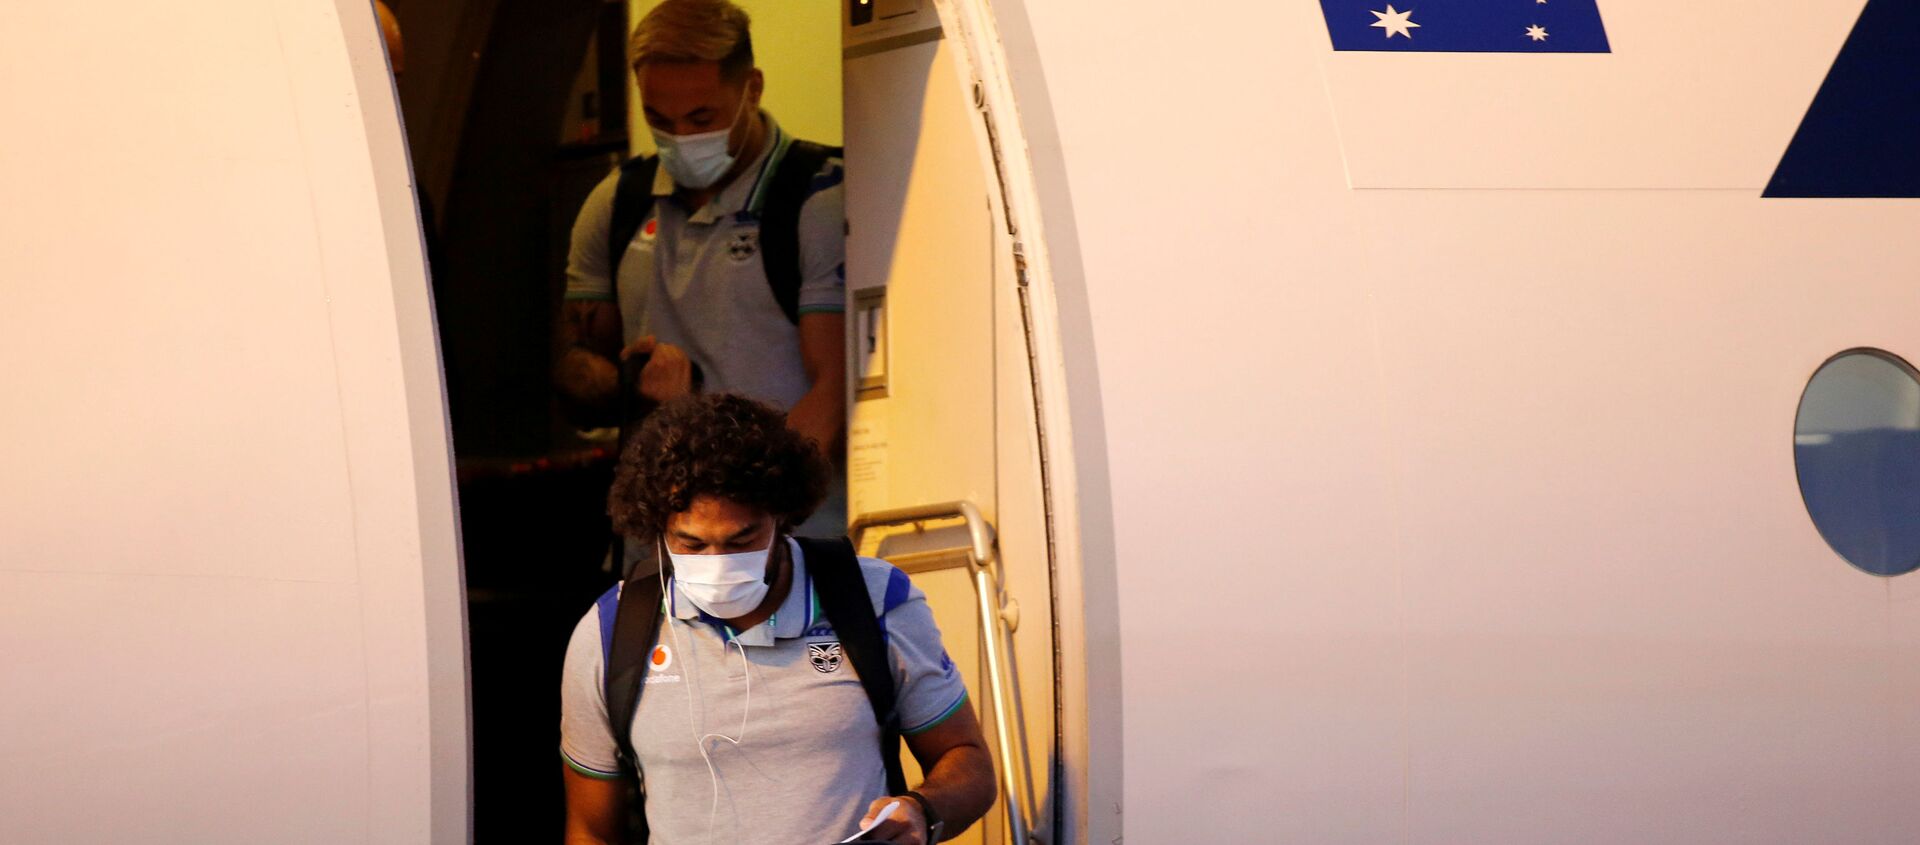 The New Zealand Warriors NRL team, which will live and train in Australia under quarantine conditions due to the coronavirus disease (COVID-19), arrives at the Tamworth Airport in Tamworth, Australia, May 3, 2020. Picture taken May 3, 2020.   - Sputnik International, 1920, 05.05.2020